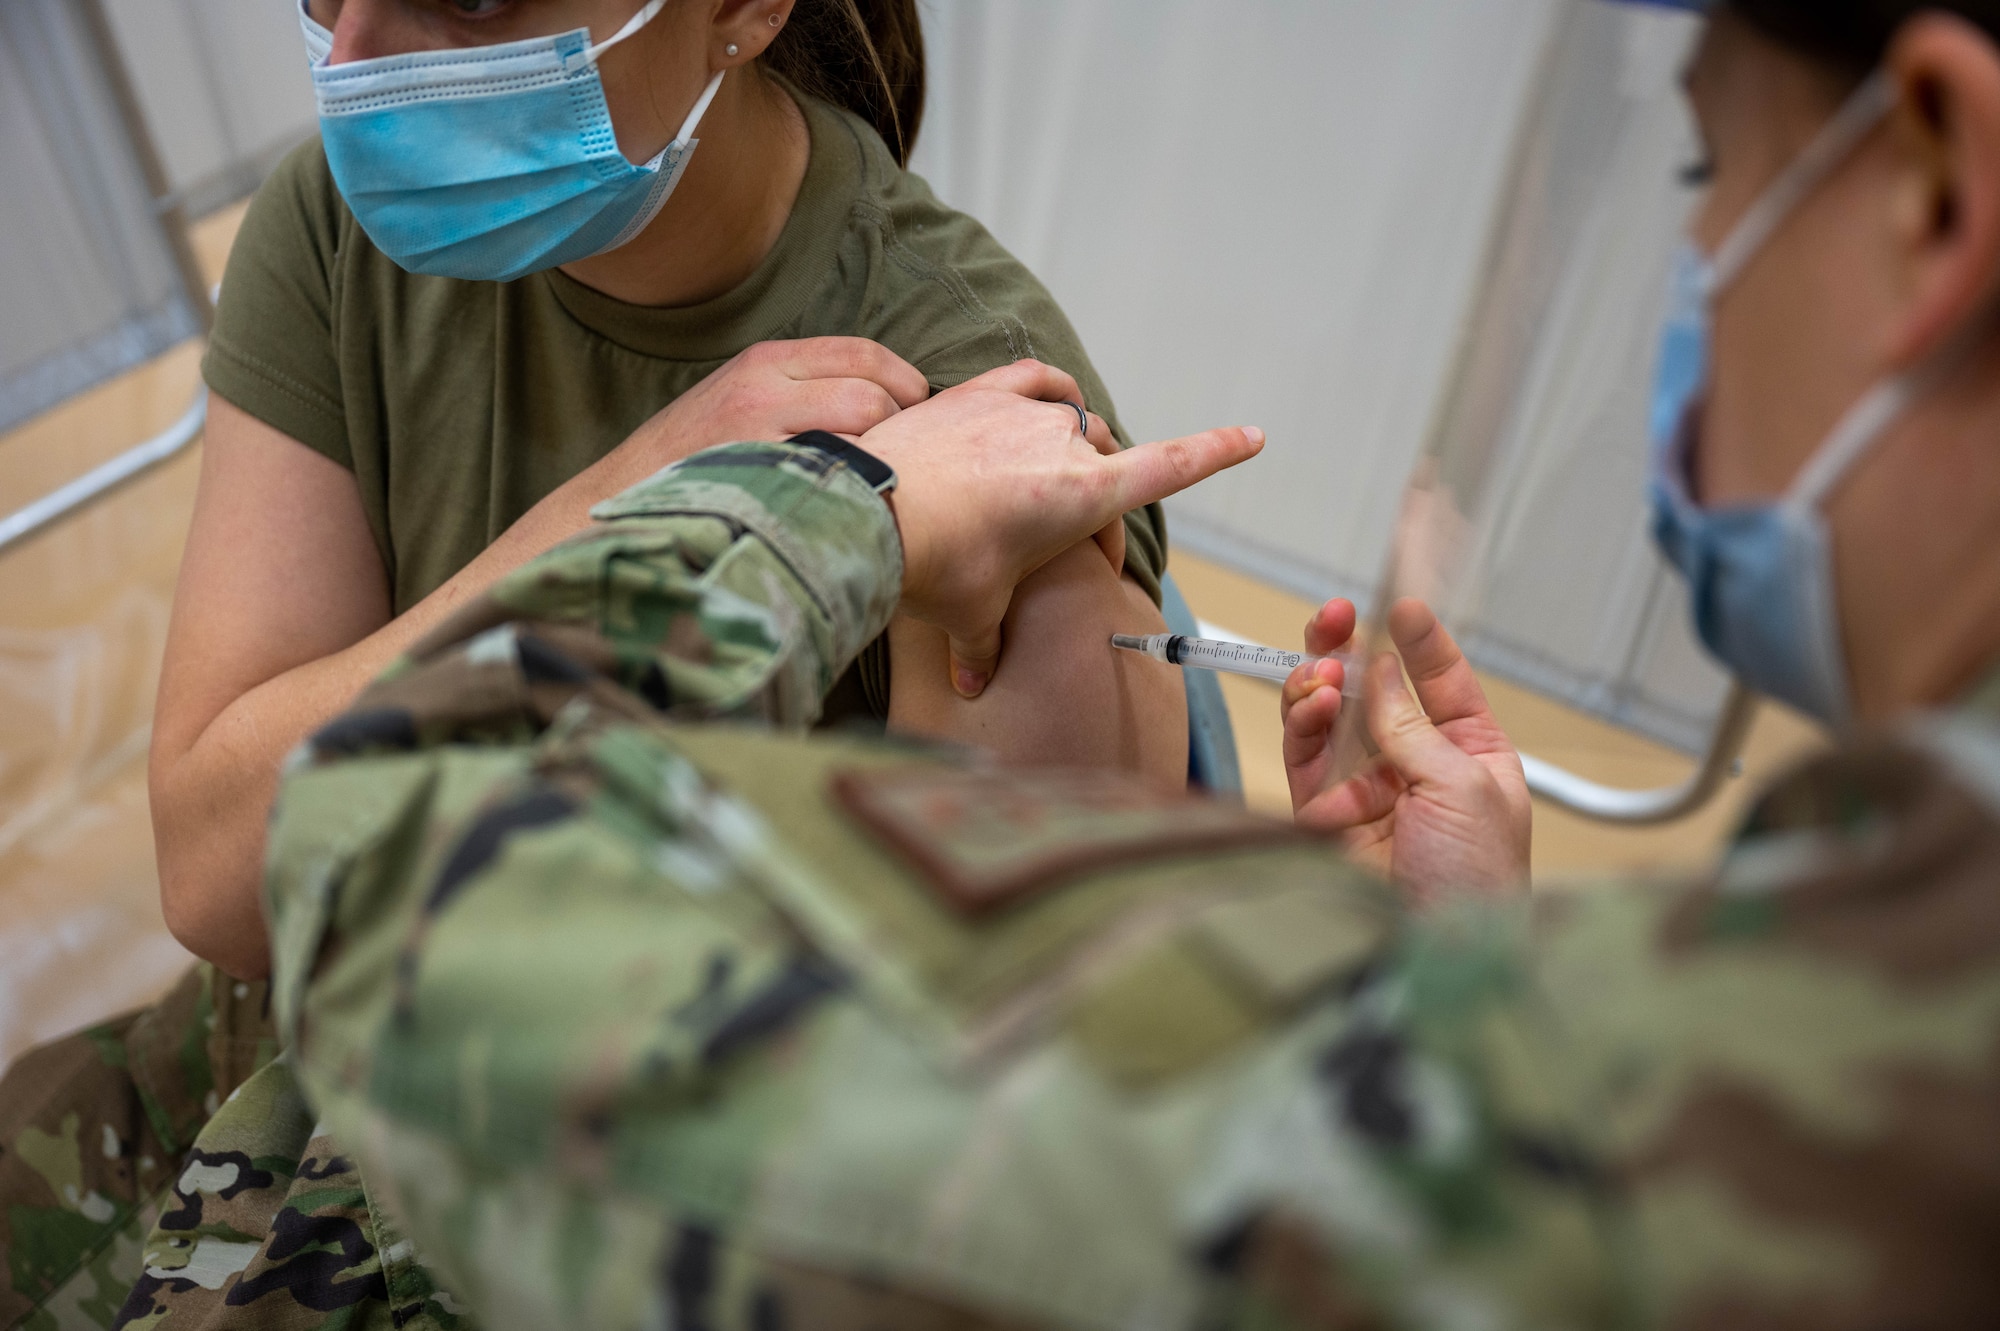 An Airman from the 934th Airlift Wing waits in the observation area after receiving the COVID-19 vaccine at the Minneapolis-St. Paul Air Reserve Station, March 7, 2021. The observation area keeps Airmen for 15 minutes after they receive their shot to ensure no immediate symptoms arise that could require care. (U.S. Air Force photo by Tech. Sgt. Trevor Saylor)